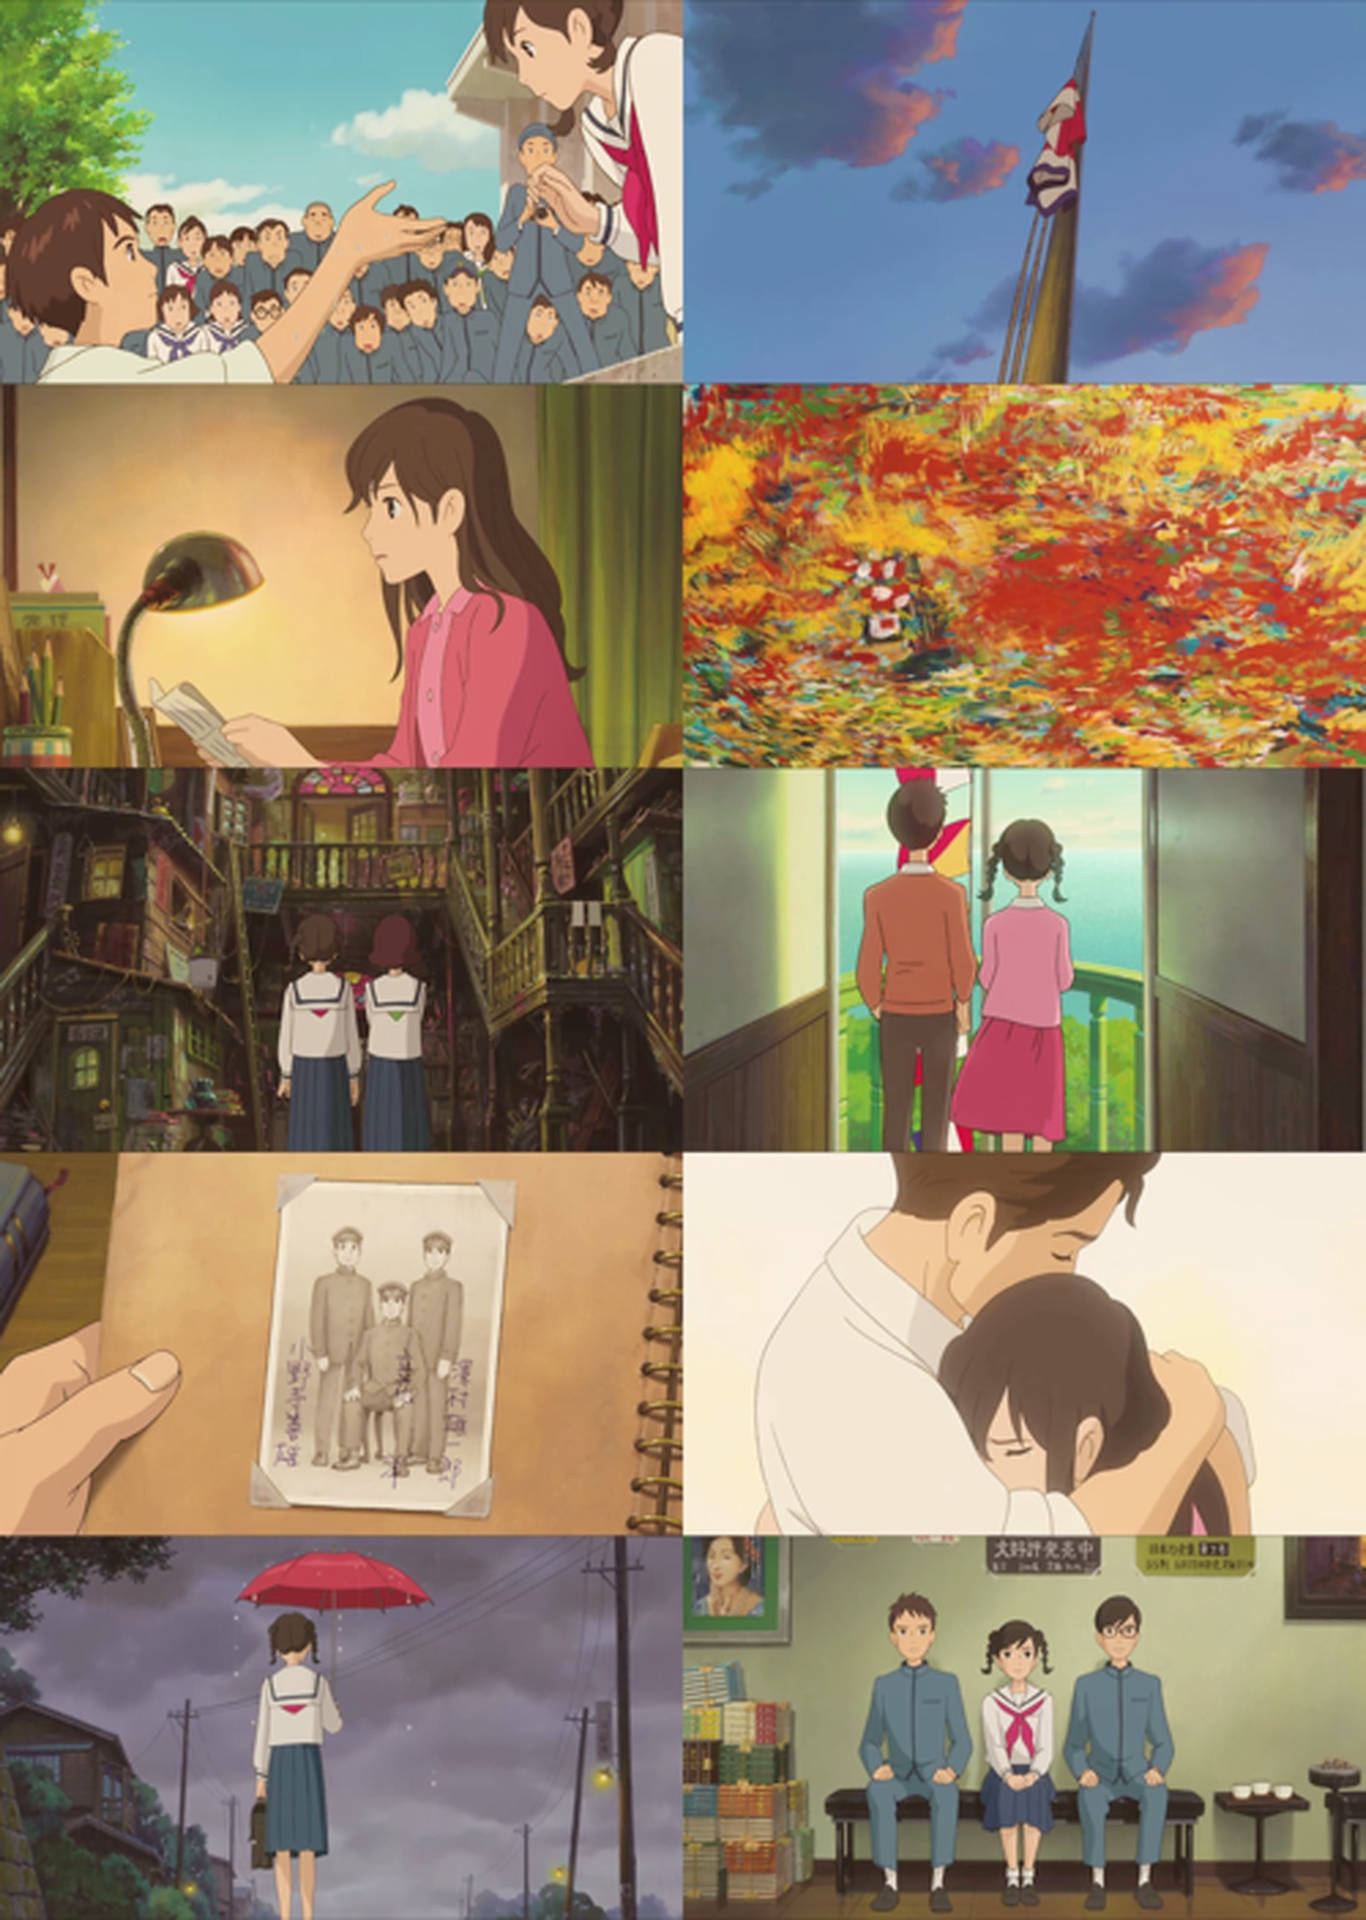 Captivating Scenery from the Movie 'From Up on Poppy Hill' Wallpaper